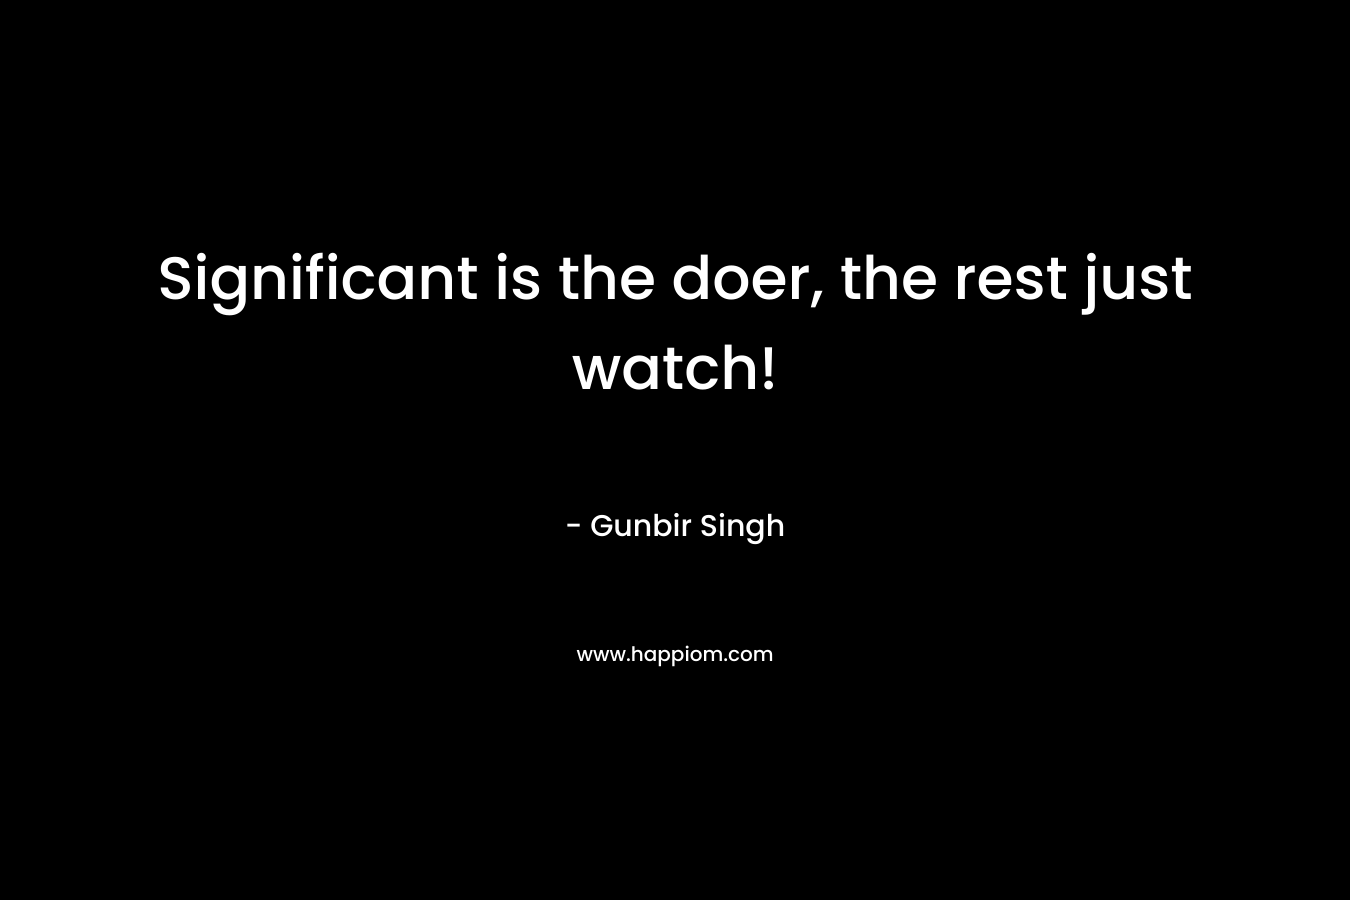 Significant is the doer, the rest just watch! – Gunbir Singh